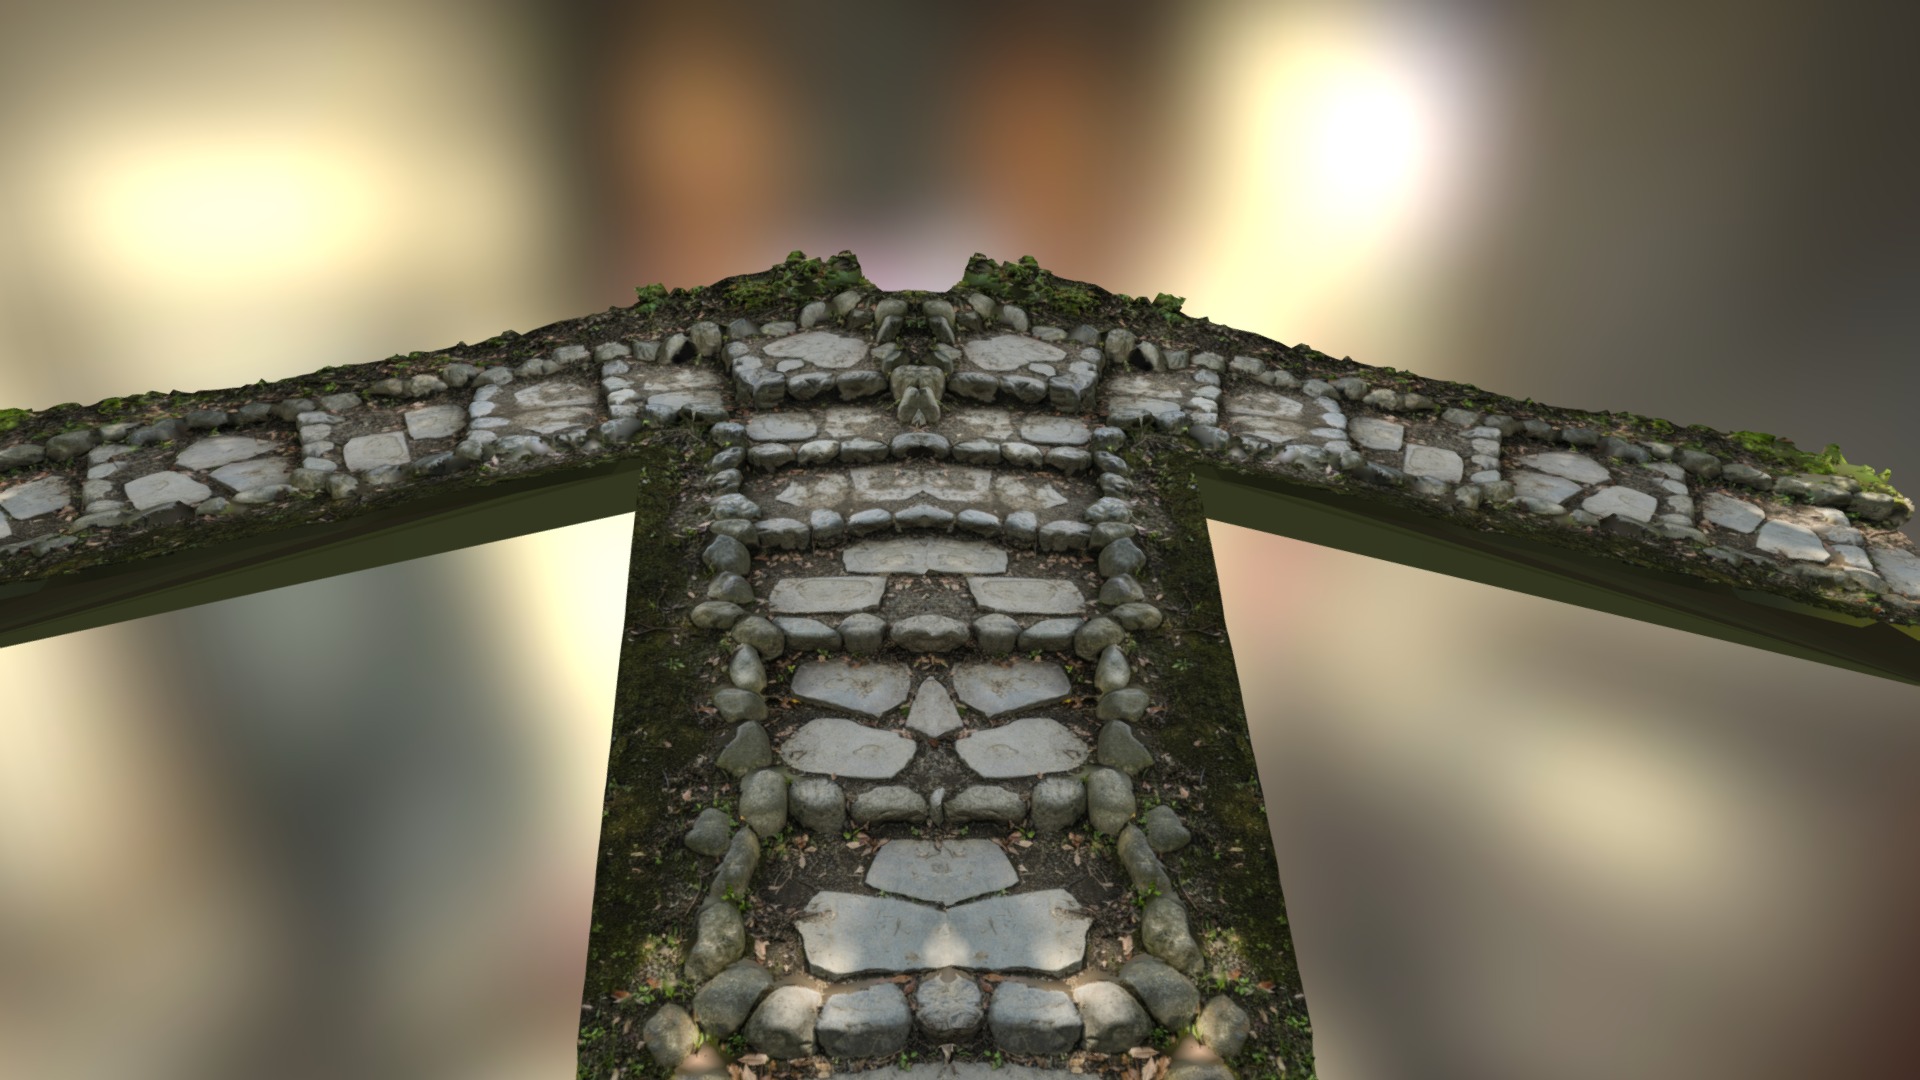 3D model Arrow stone stairs photogrammetry scan - This is a 3D model of the Arrow stone stairs photogrammetry scan. The 3D model is about a stone structure with a stone wall.